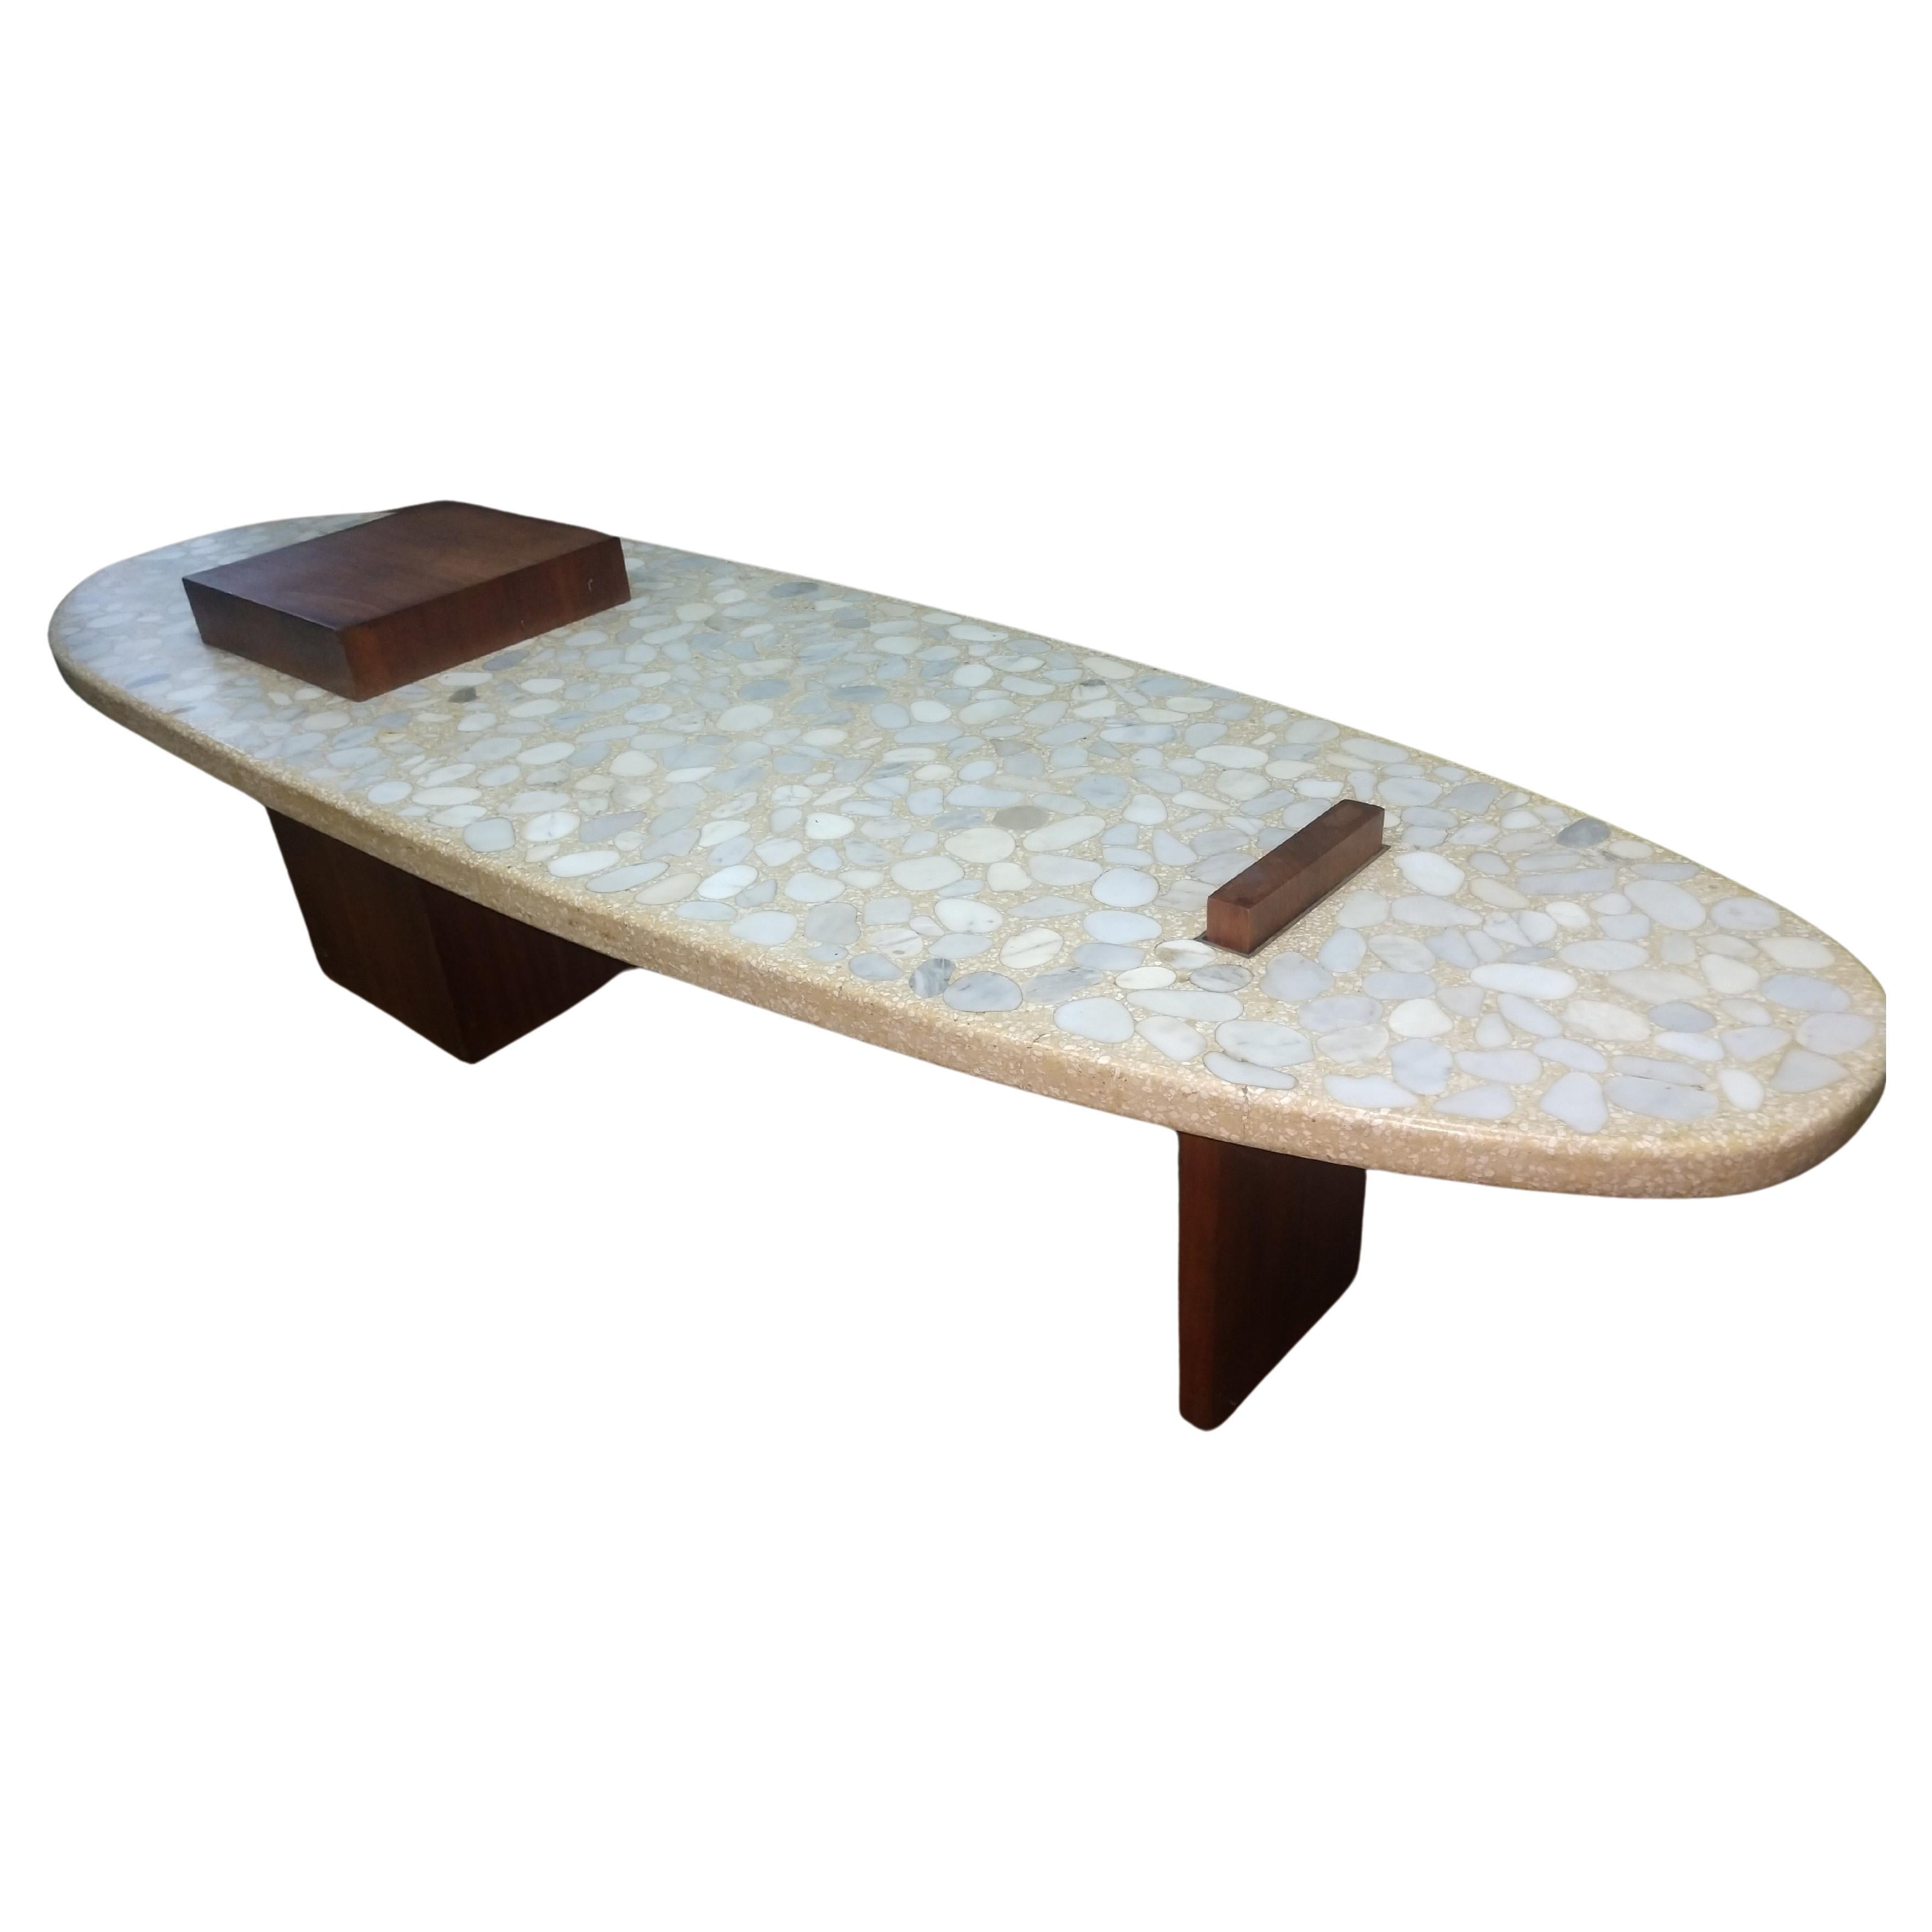 American Mid-Century Modern Terrazzo Marble and Walnut Cocktail Table by Harvey Probber For Sale